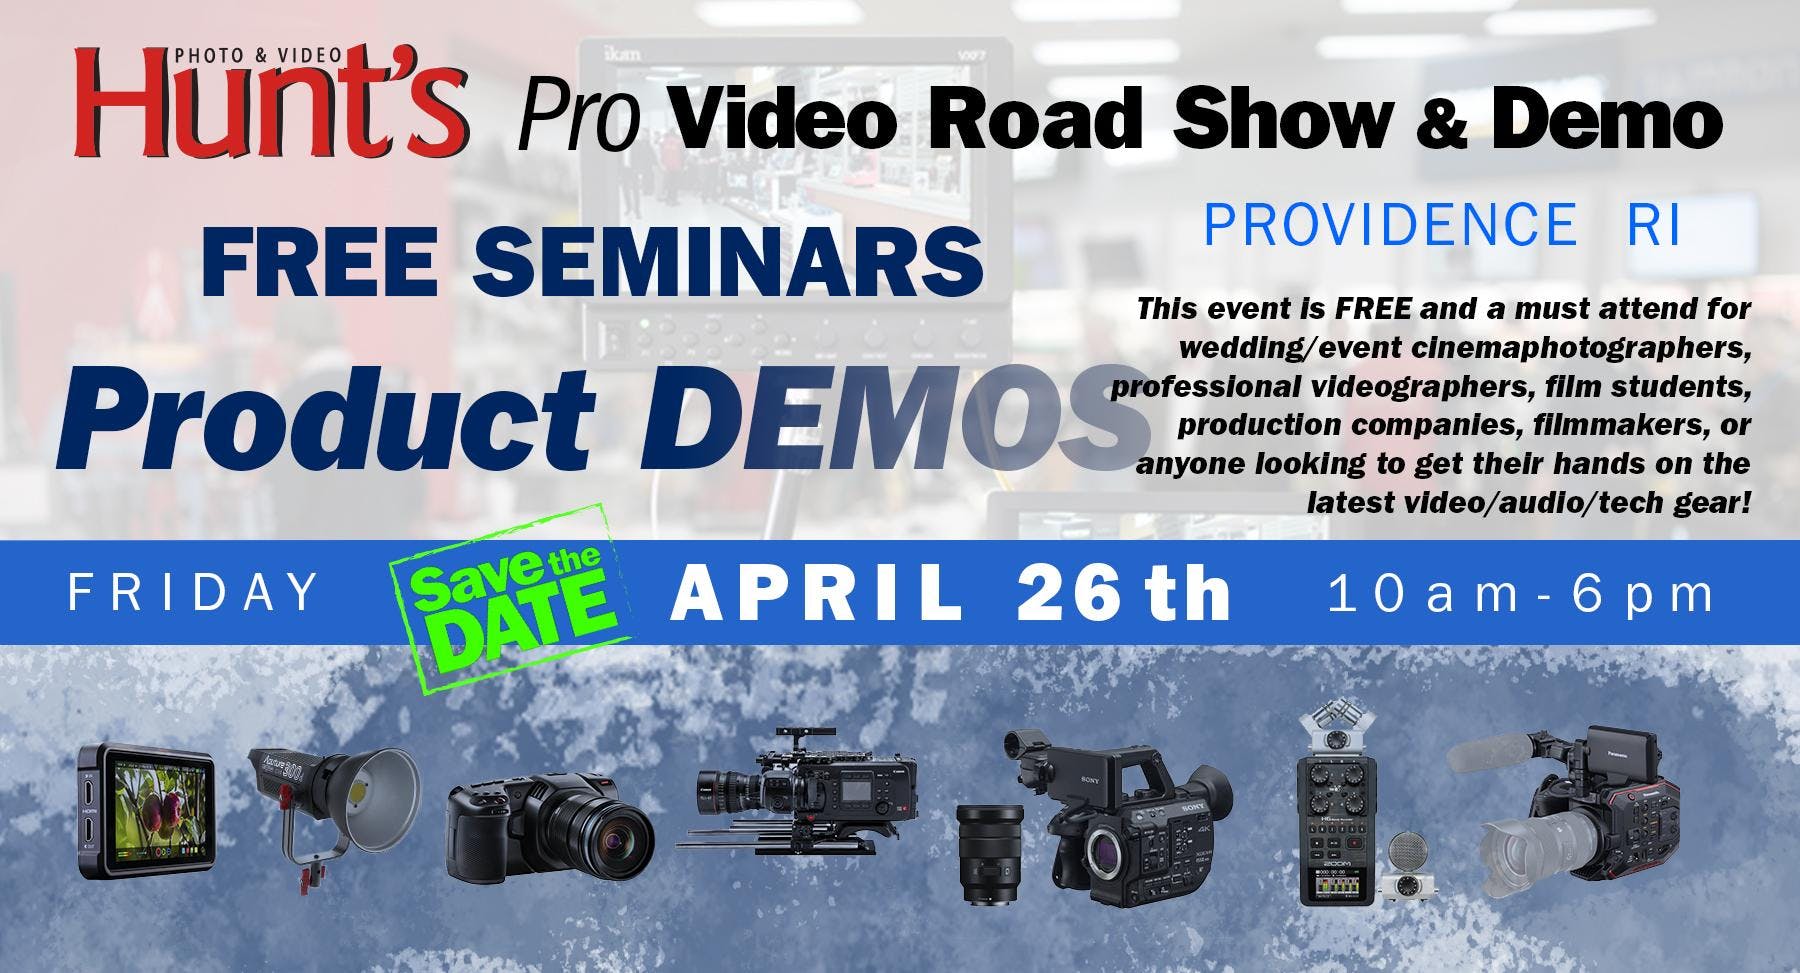 Hunt's Photo & Video Professional Video Show and Demo Providence RI